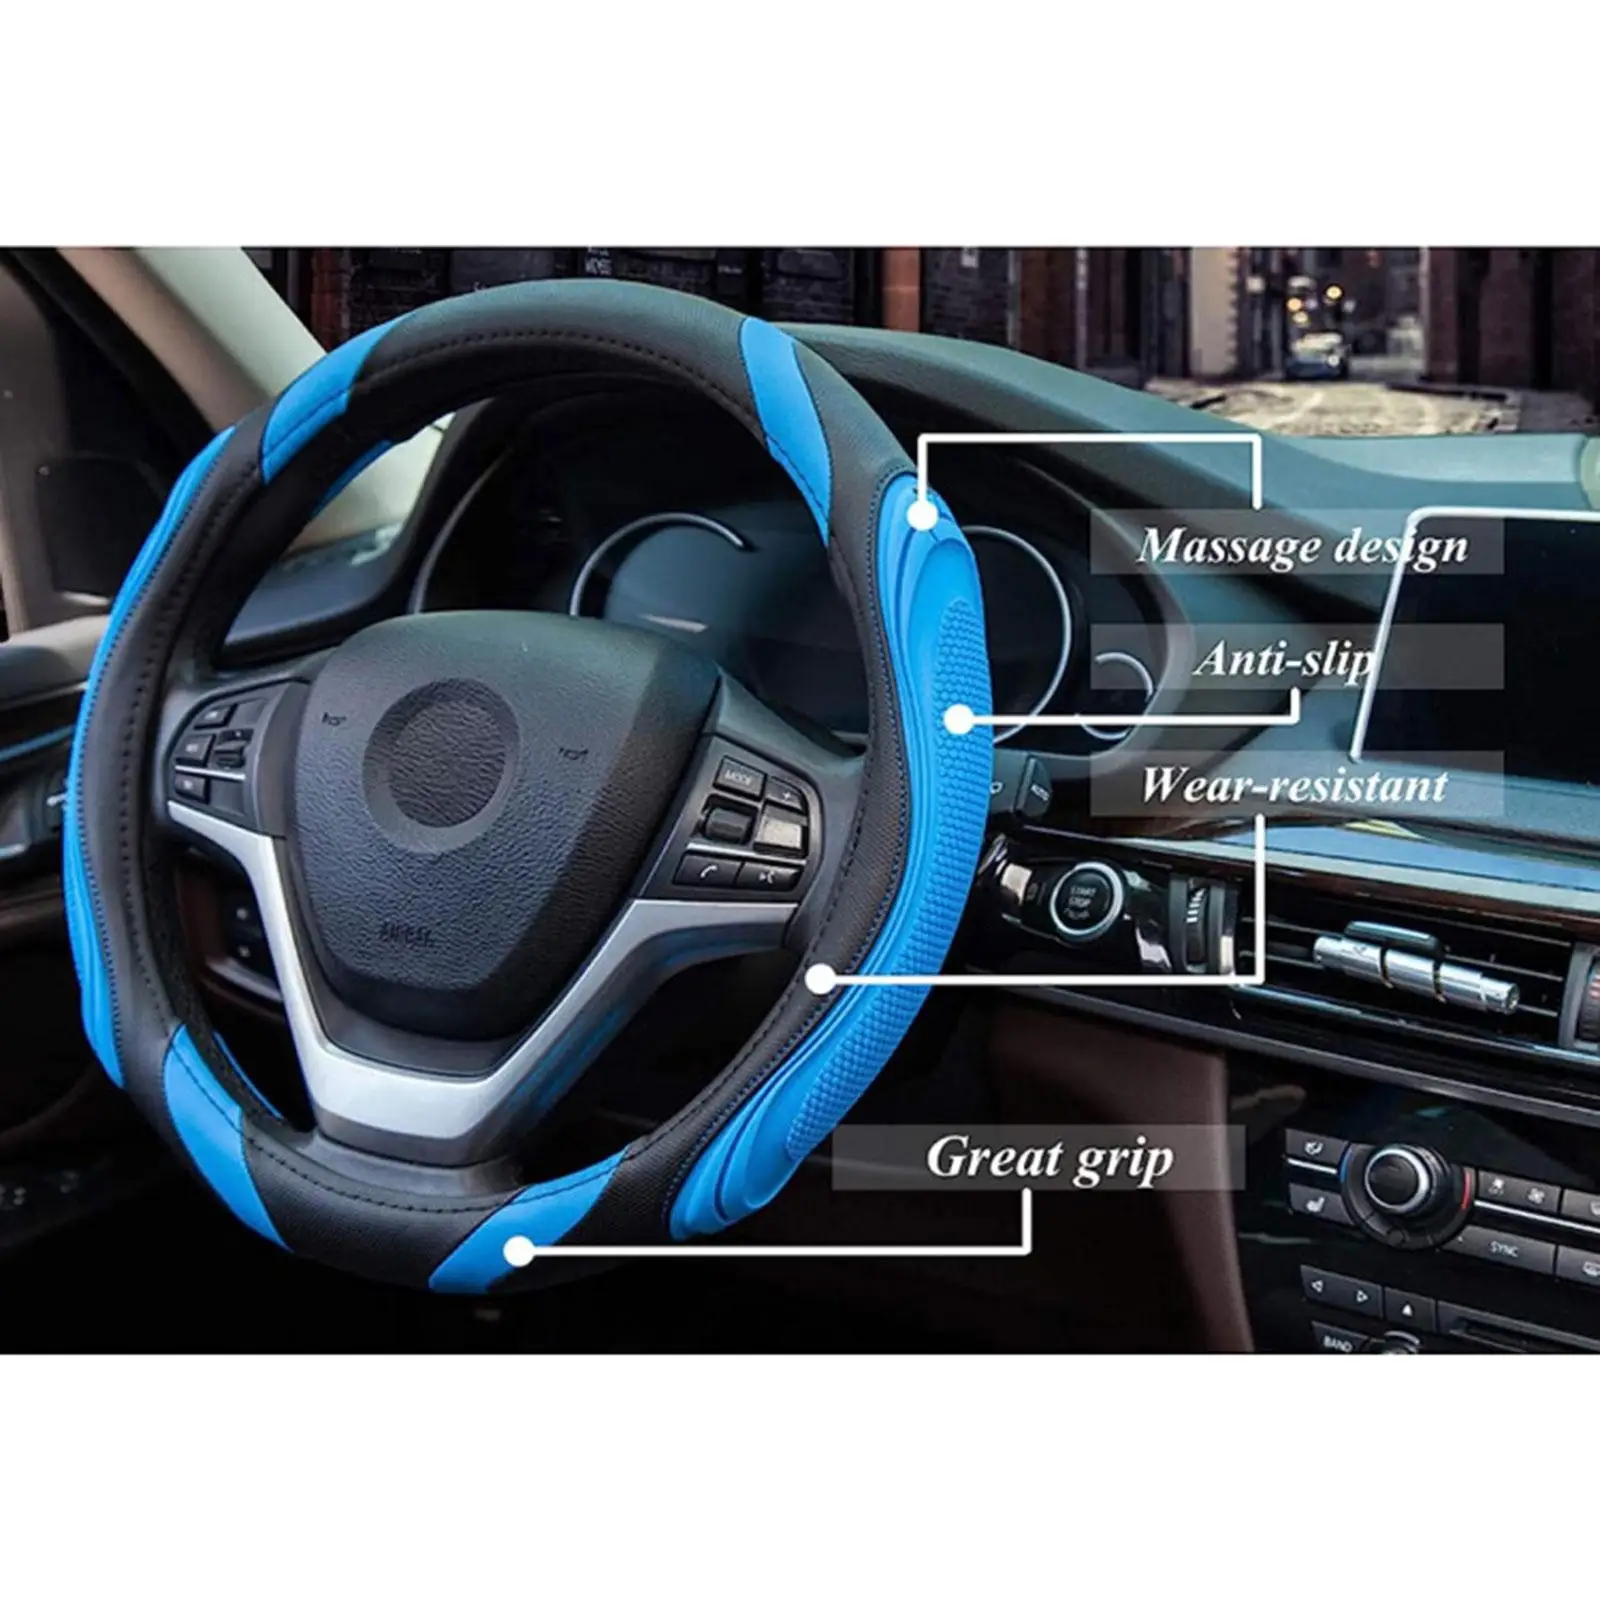 Steering Wheel Cover Universal for Women Men Fashion Splicing Process Wear Resistant Easily Install Anti Slip Lining PU Leather